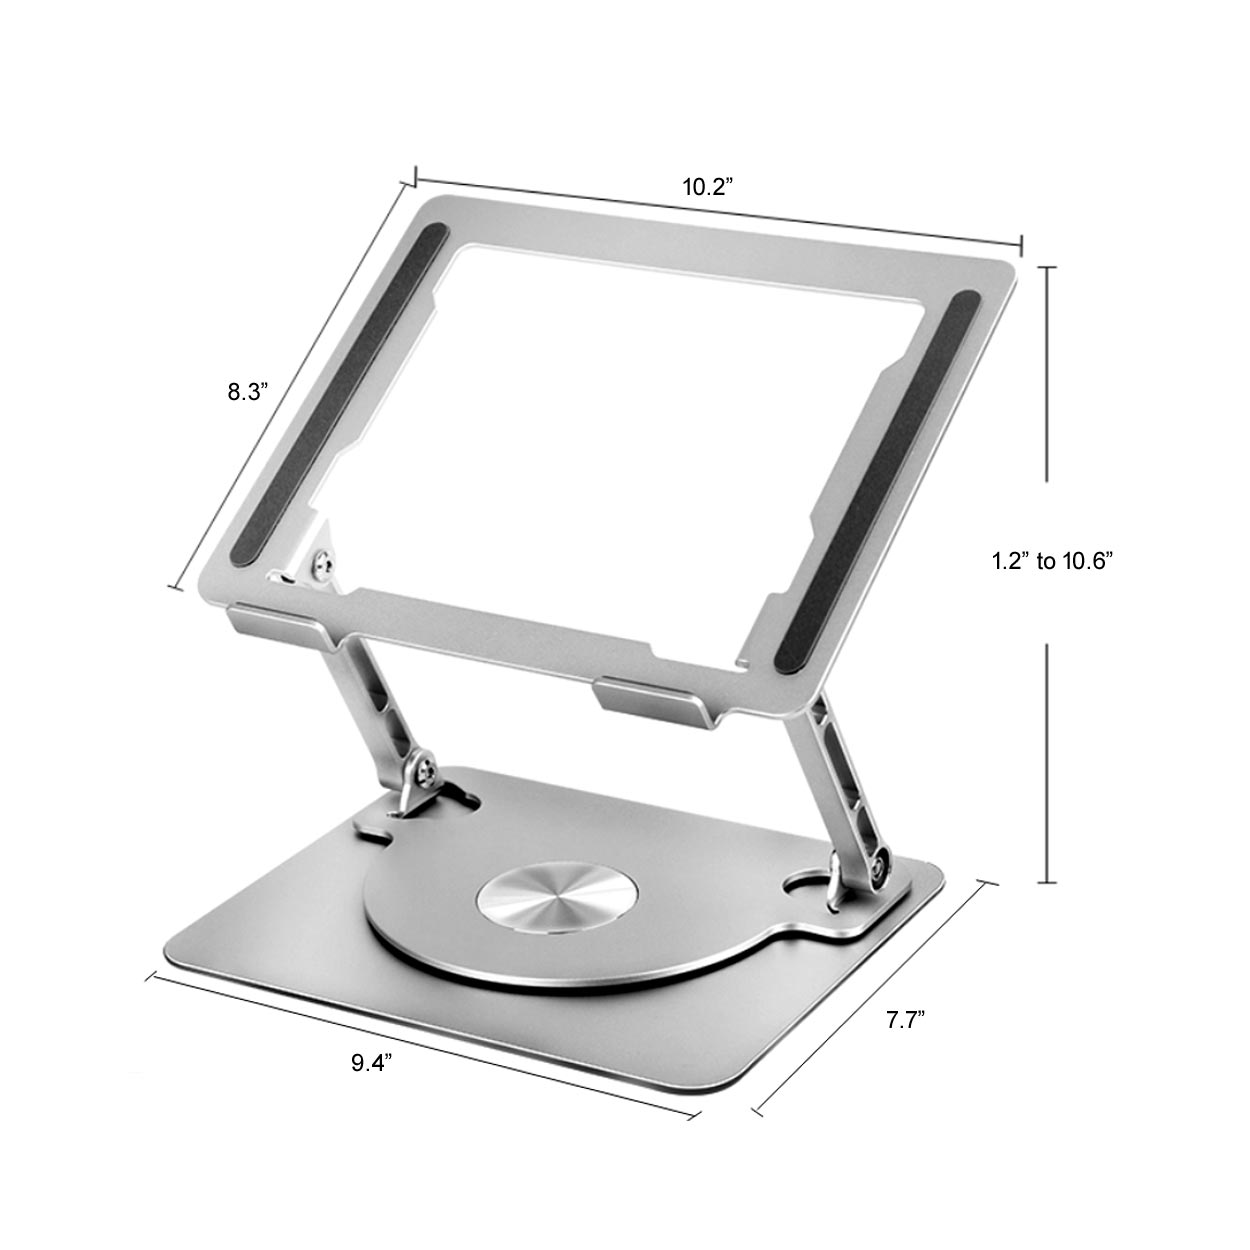 Adjustable Laptop Stand with 360 Rotating Base - 7